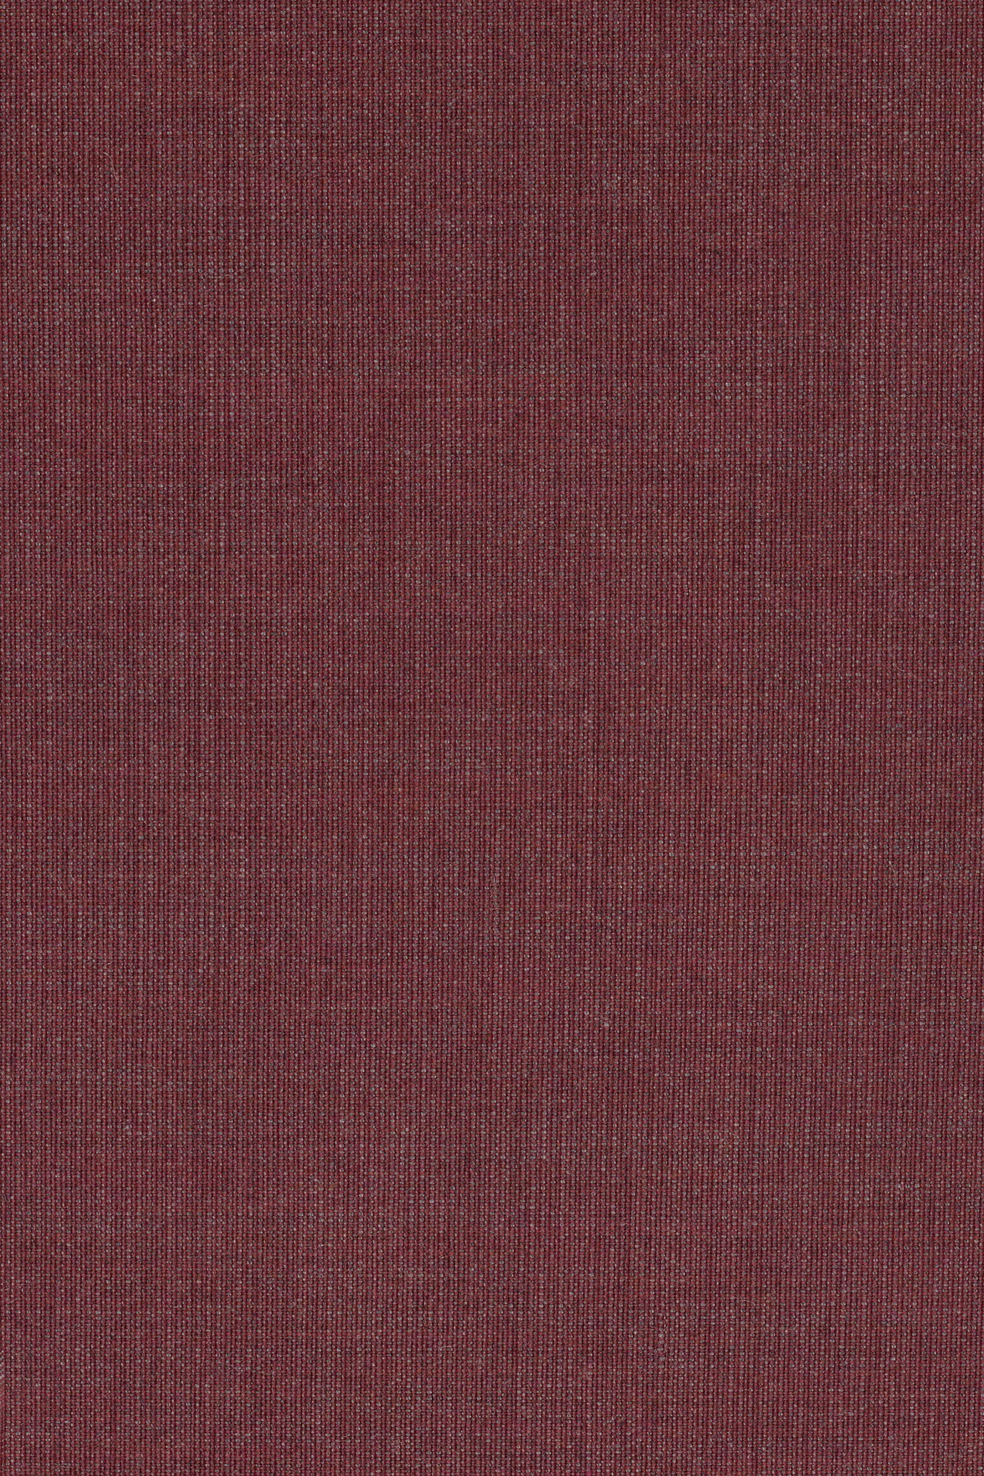 Fabric sample Canvas 2 654 red